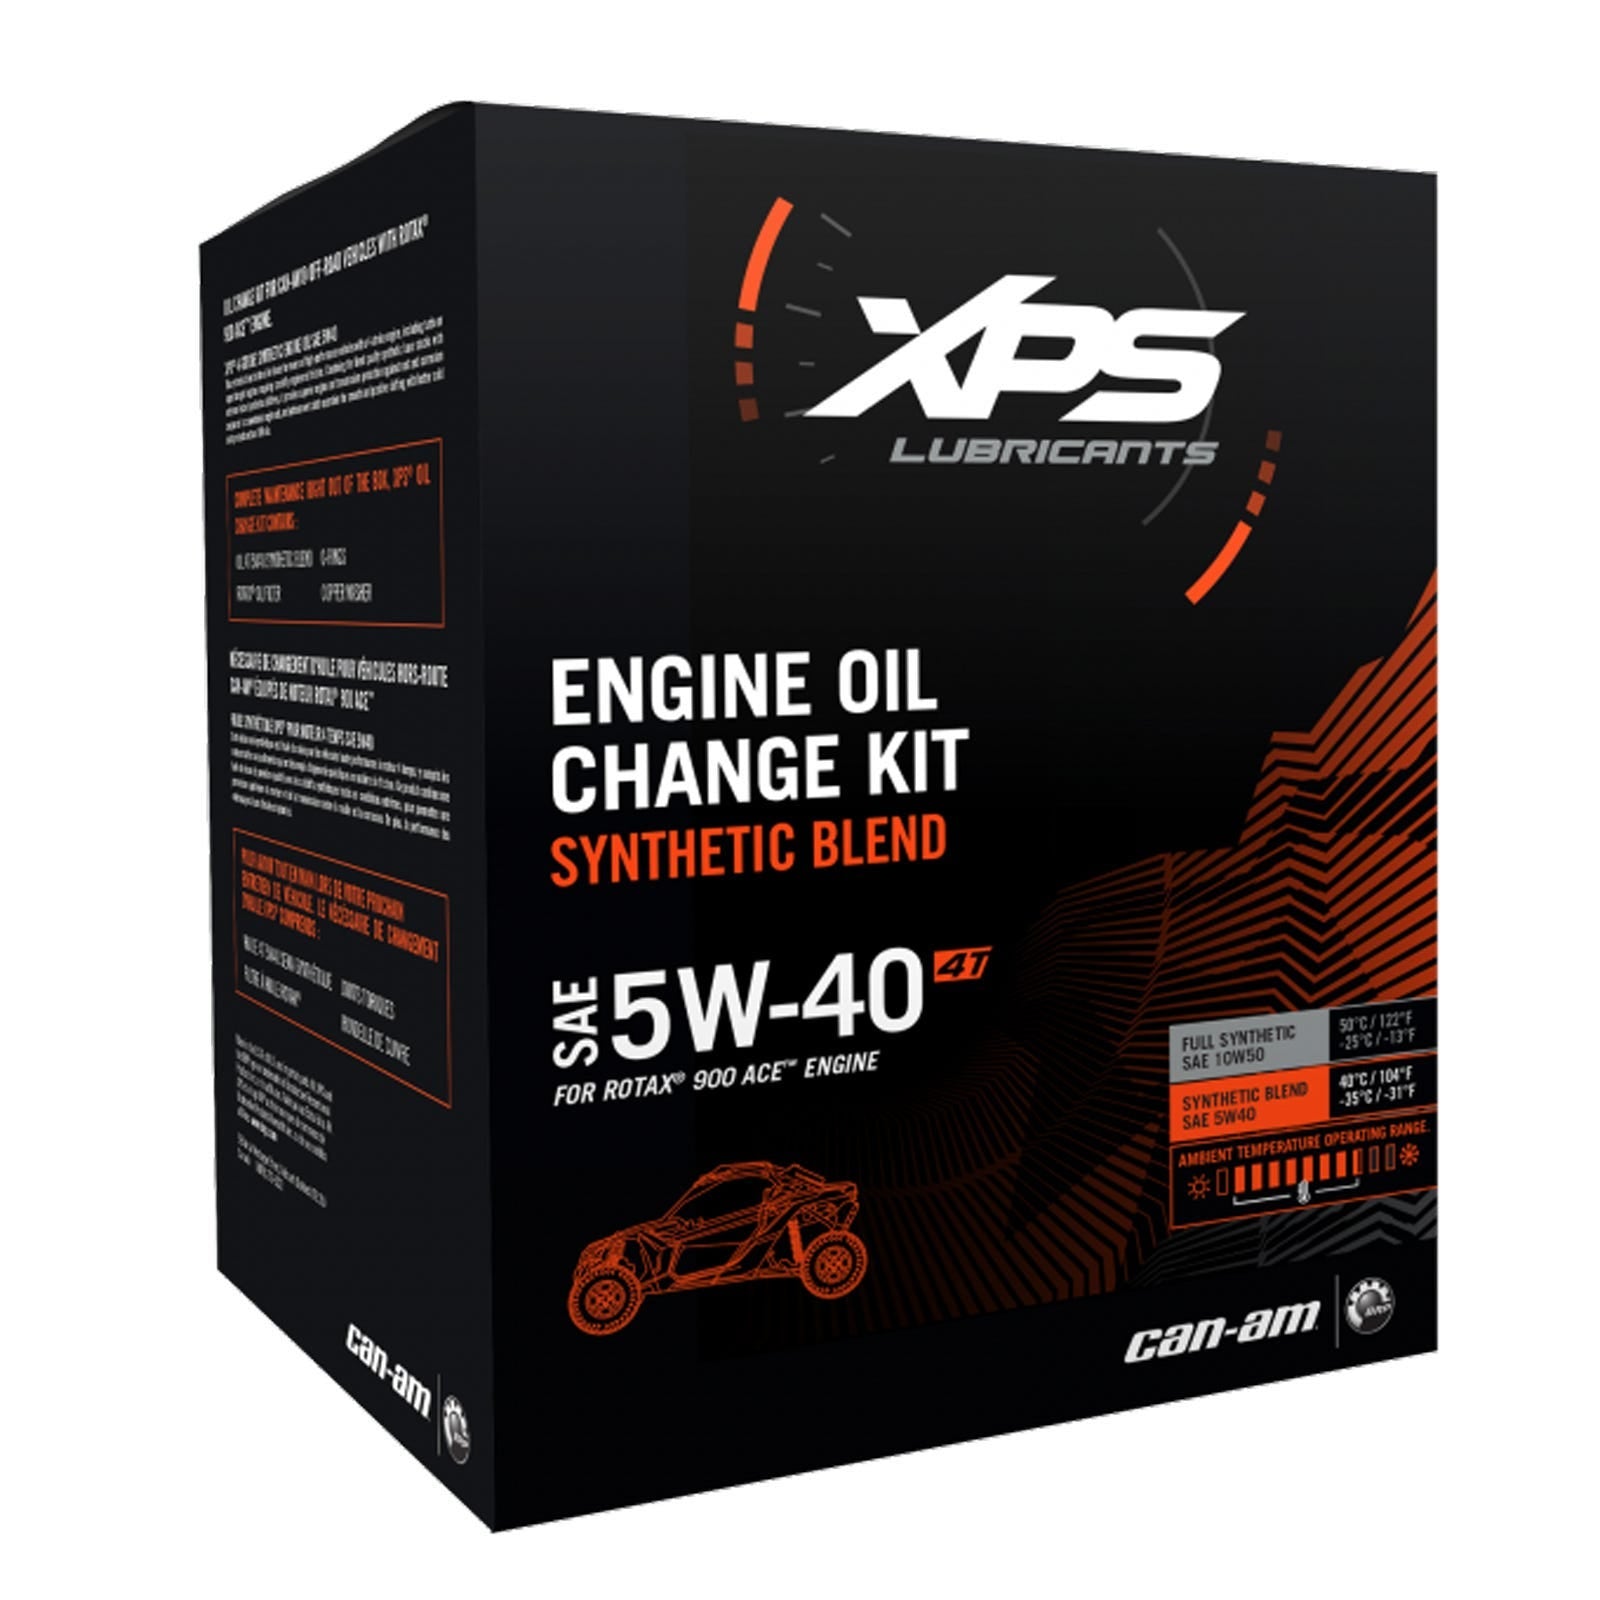 Can-am 4T 5W-40 Synthetic Blend Oil Change Kit for Rotax 900 ACE engine 779260 - The Parts Lodge